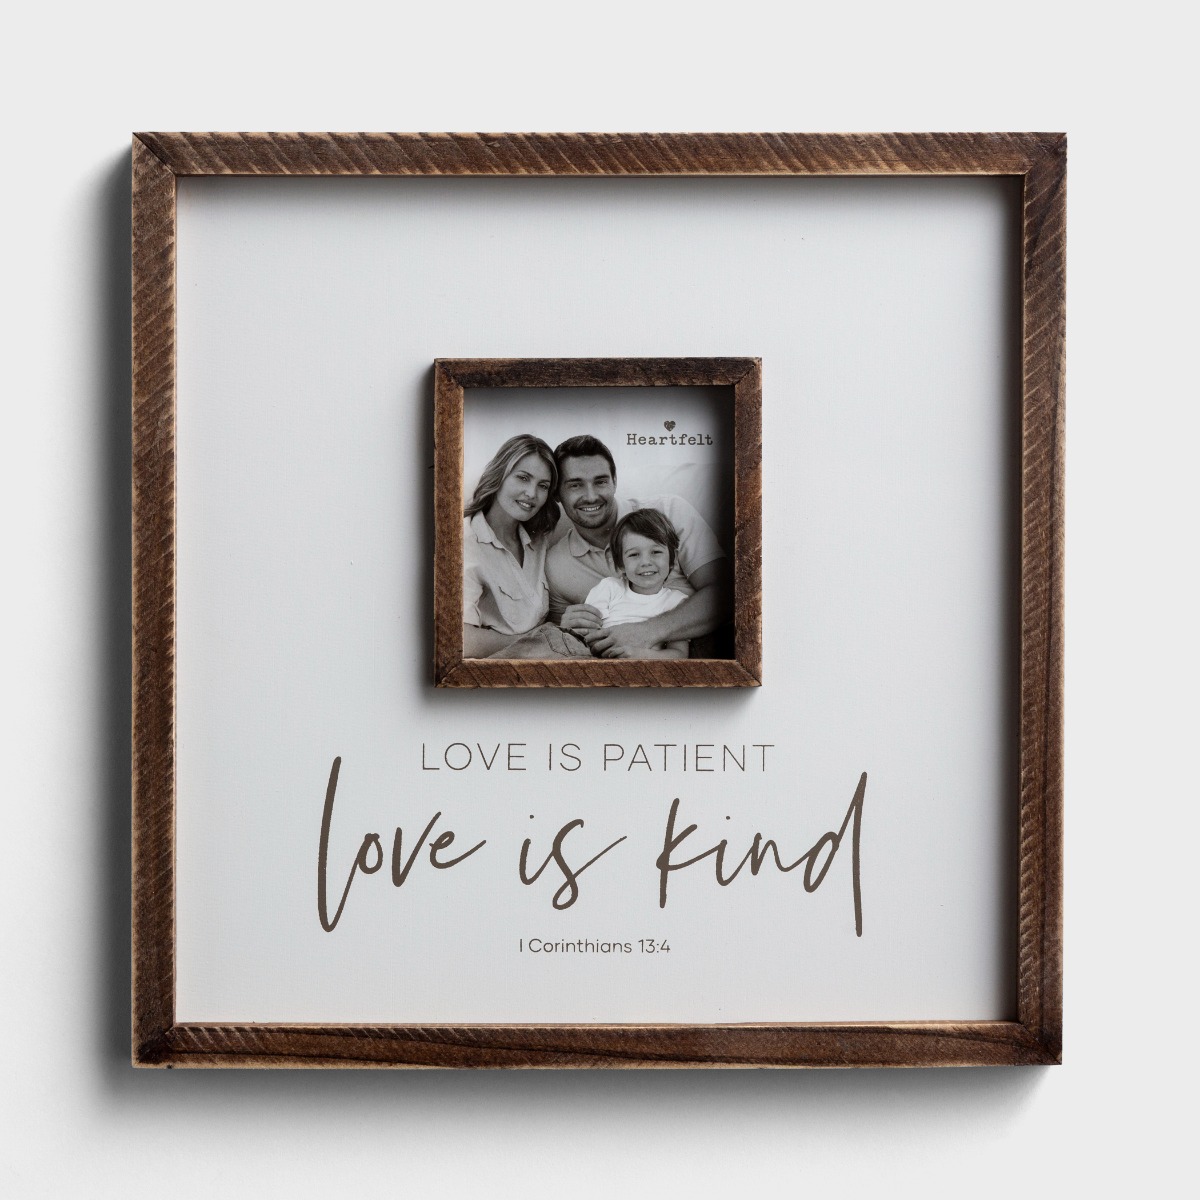 Love Is Patient - Square Photo Frame